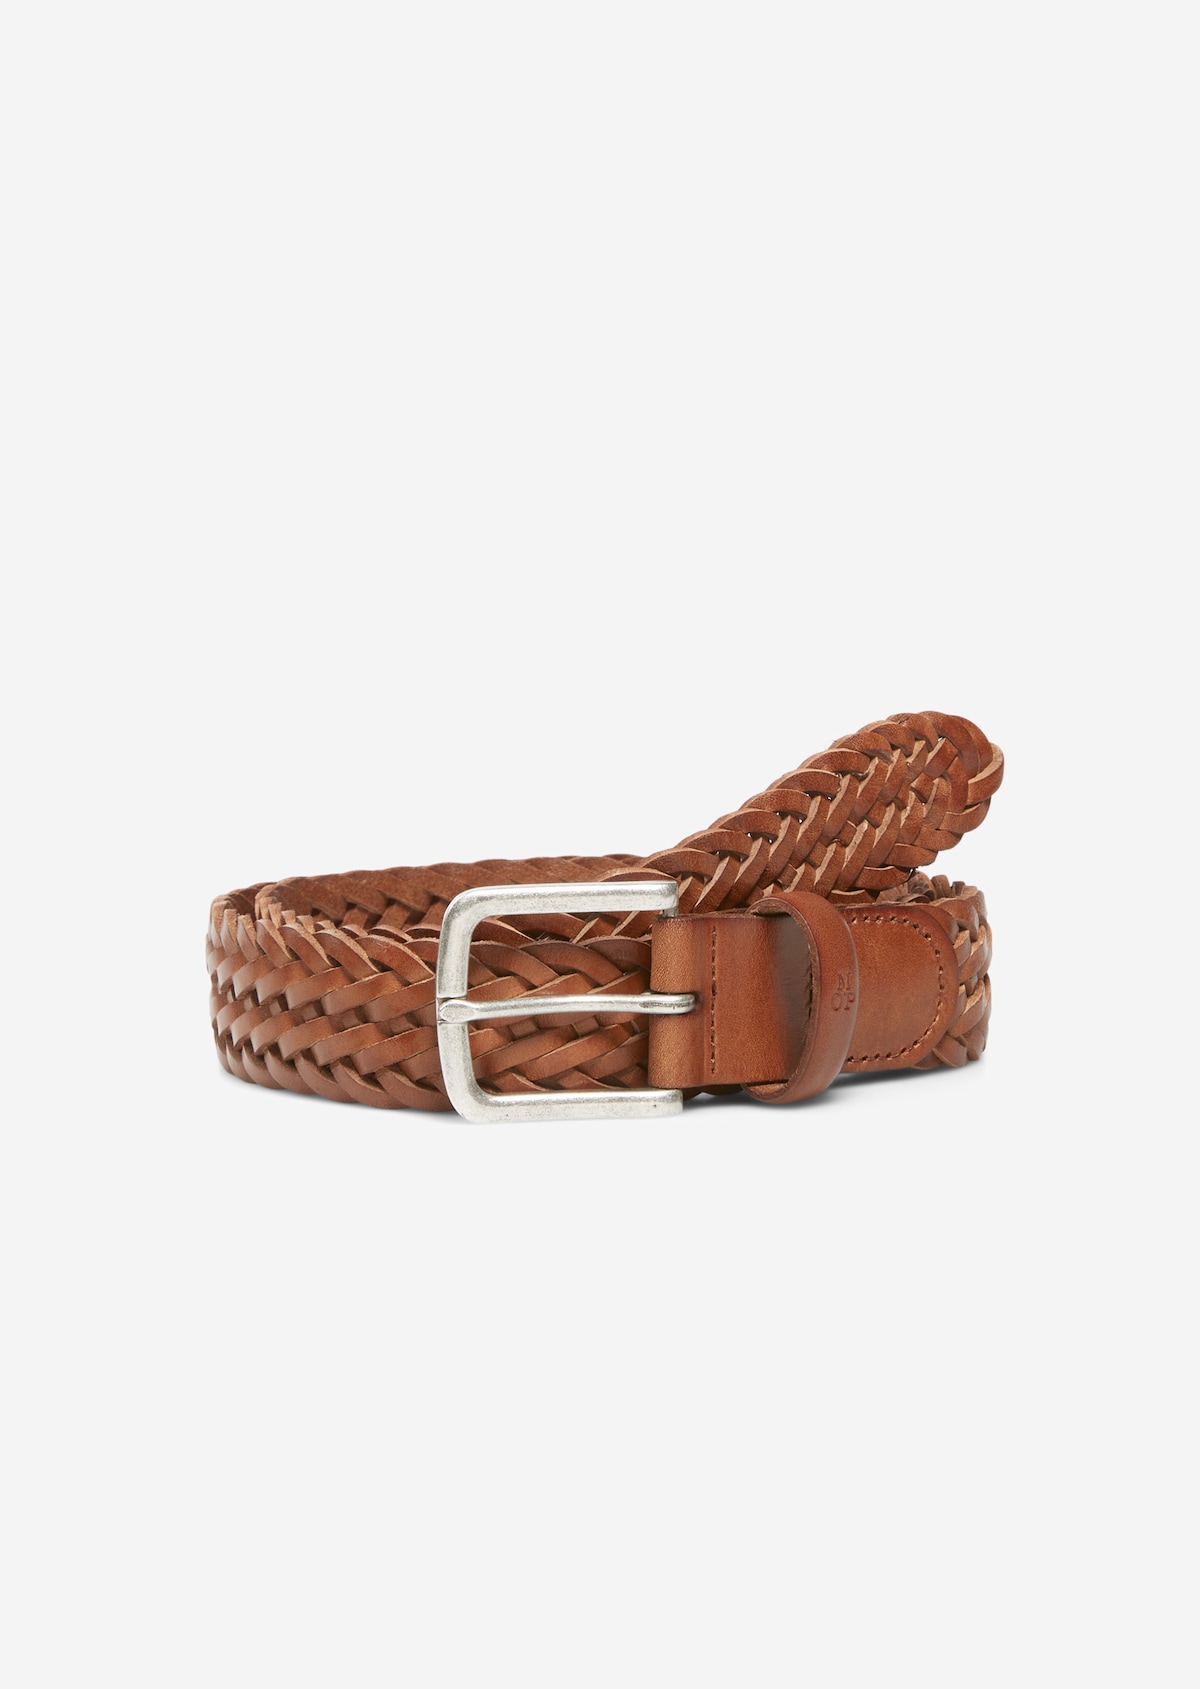 Braided belt made of fine cowhide leather - brown | Belts | MARC O\'POLO